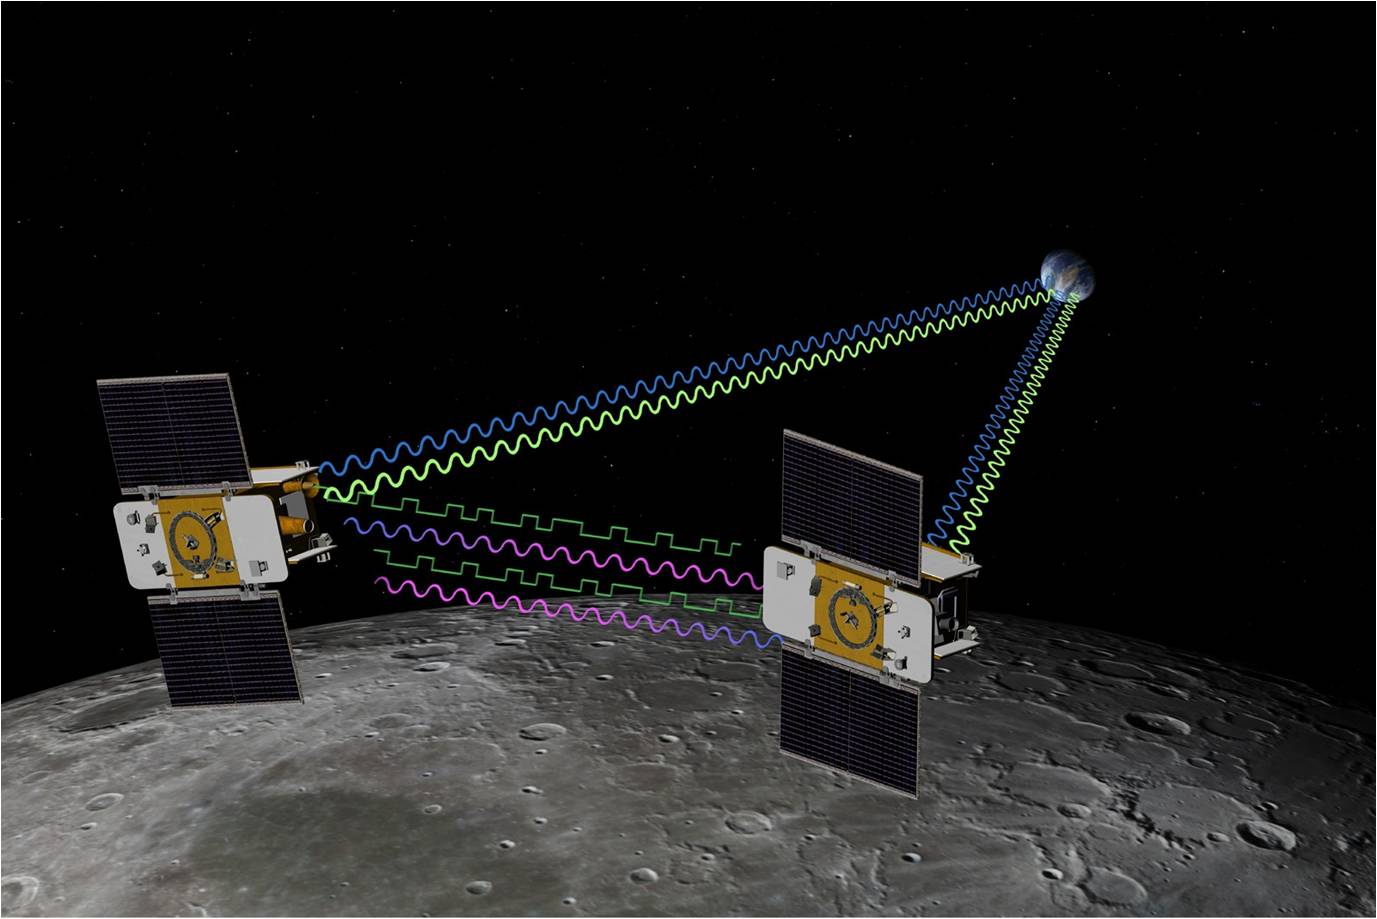 An artist's illustration shows two solar-winged spacecraft connected by wiggly lines representing communication. The lines extend to Earth; the spacecraft float above the moon.